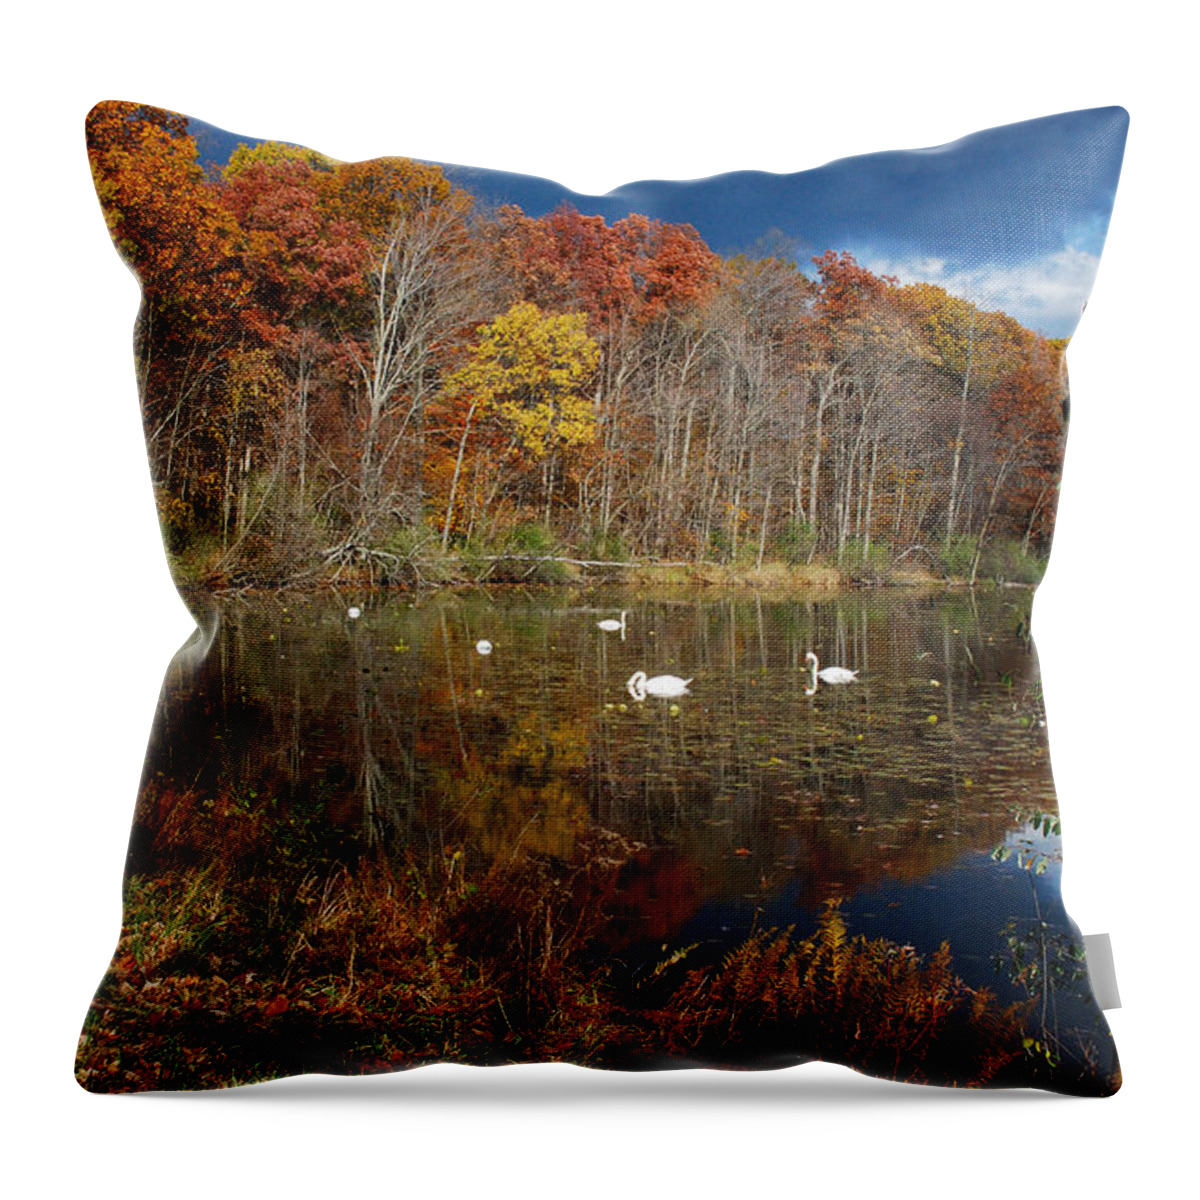 Autumn; Fall Colors; Swans; Lake; Michigan; Kensington Metro Park Throw Pillow featuring the photograph Swans Enjoying A Swim On A Beautiful Autumn Day by Janice Adomeit